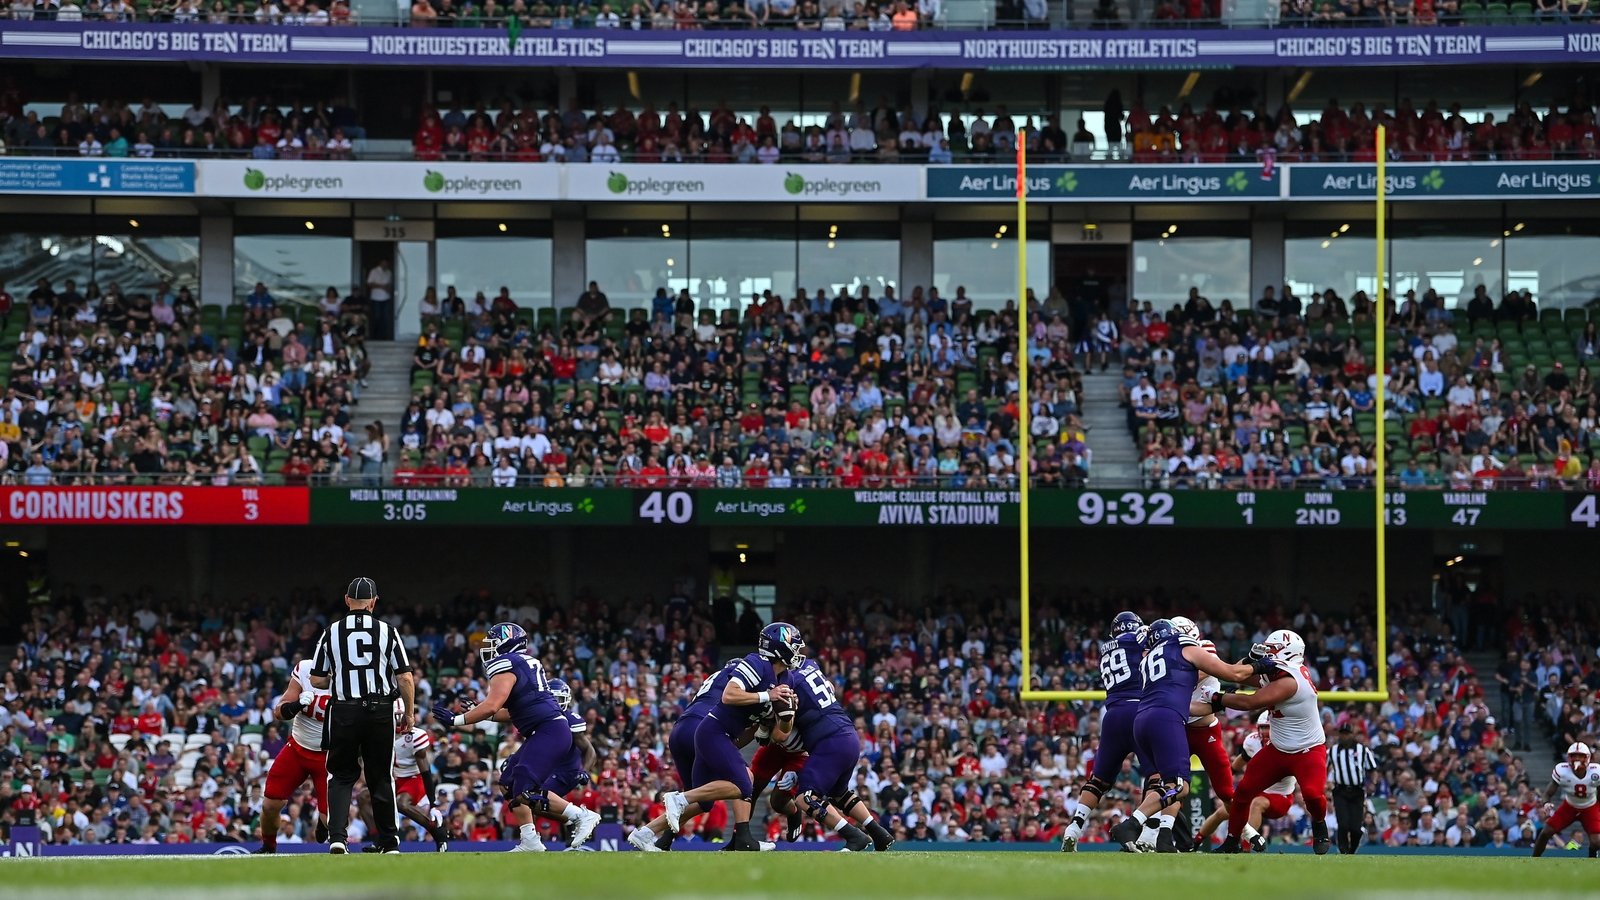 Image - The action during the Aer Lingus College Football Classic 2022 match at Aviva Stadium